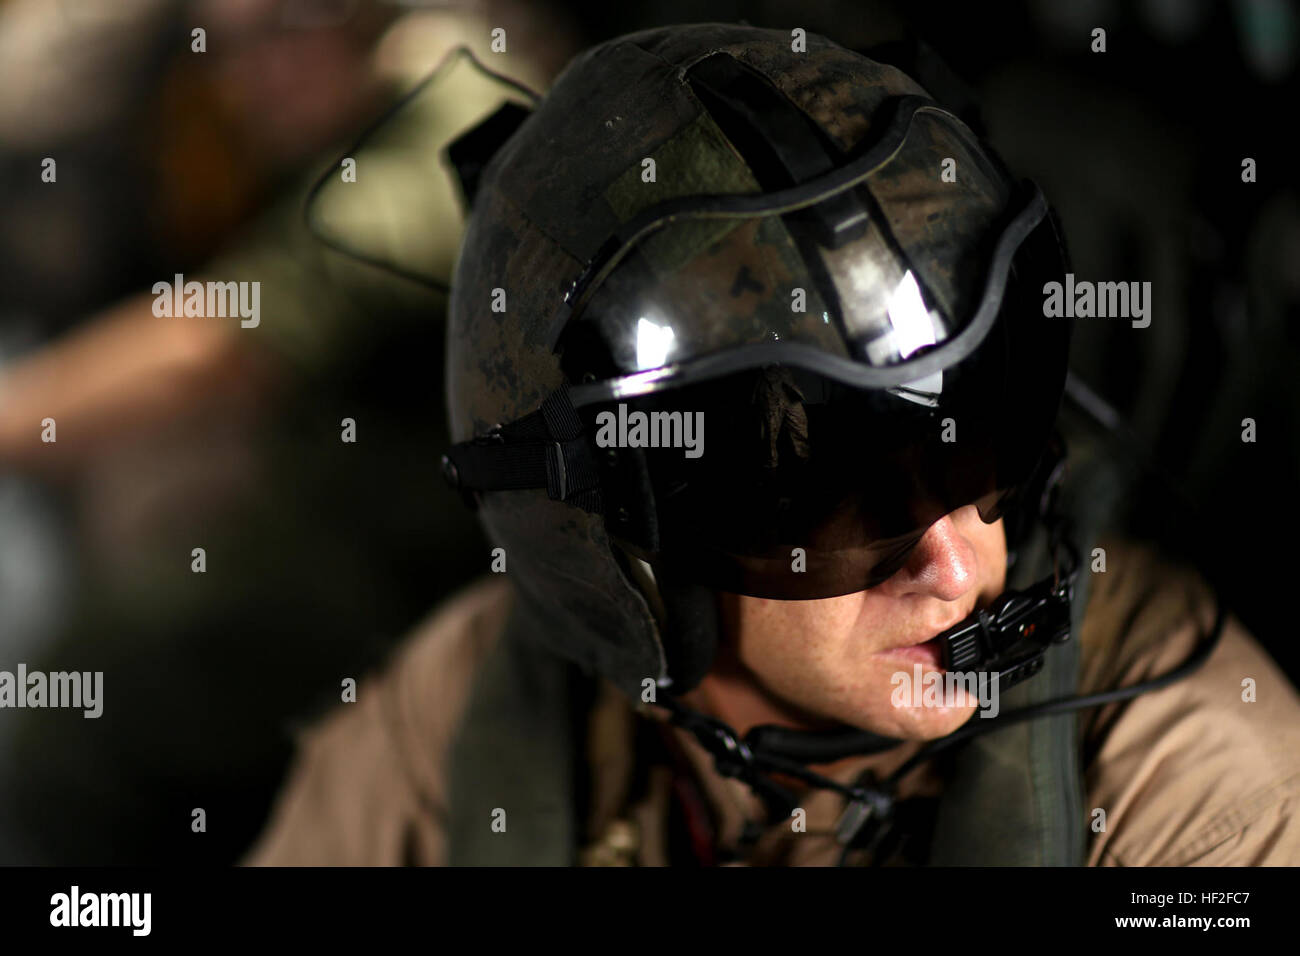 U.S. Marine Corps Master Sgt. Michael J. Cuttic, a crew chief assigned to Marine Heavy Helicopter Squadron (HMH) 366, looks out of a CH-53E Super Stallion aboard Ft. Ambrose Powell Hill, Va., Sept. 9, 2014. HMH-366 transported Marines with 3rd Battalion, 2nd Marine Regiment into a simulated combat zone during a training exercise. (U.S. Marine Corps photo by Lance Cpl. Jodson B. Graves/Released) HMH-366 conducts Training Exercise 140909-M-SW506-030 Stock Photo